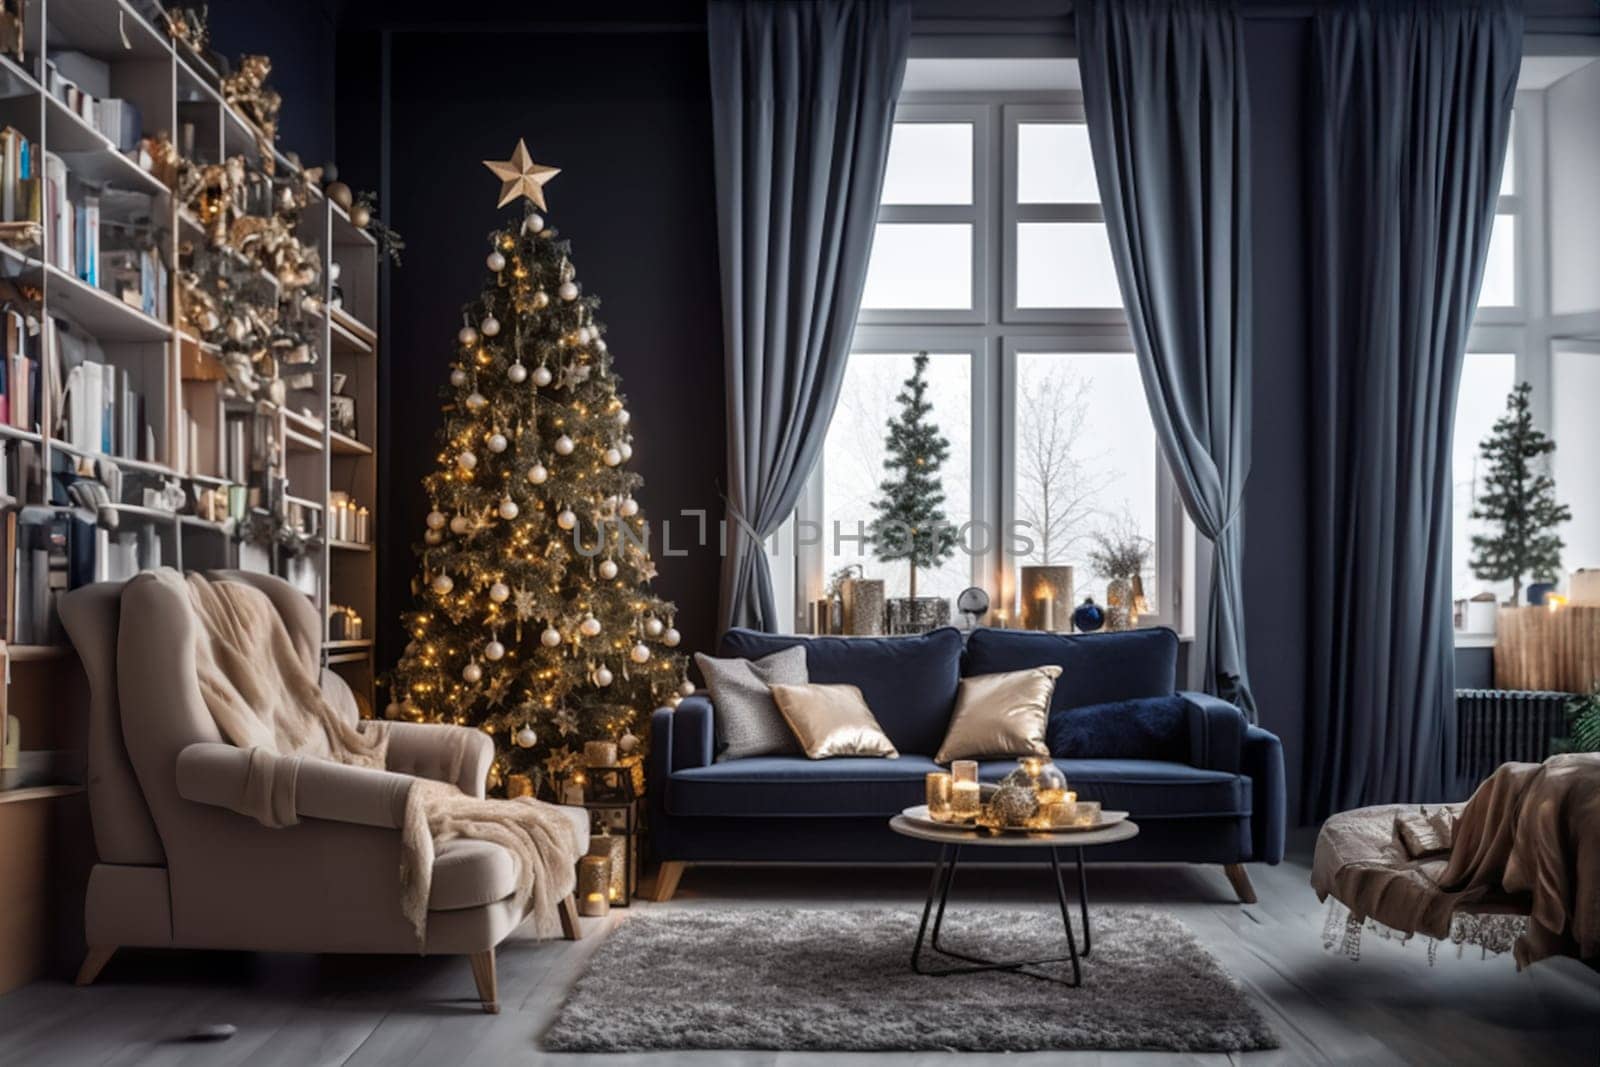 A spectacular Christmas tree and a sophisticated sofa embellish the contemporary living room. A fusion of elegance and festivity in interior decor